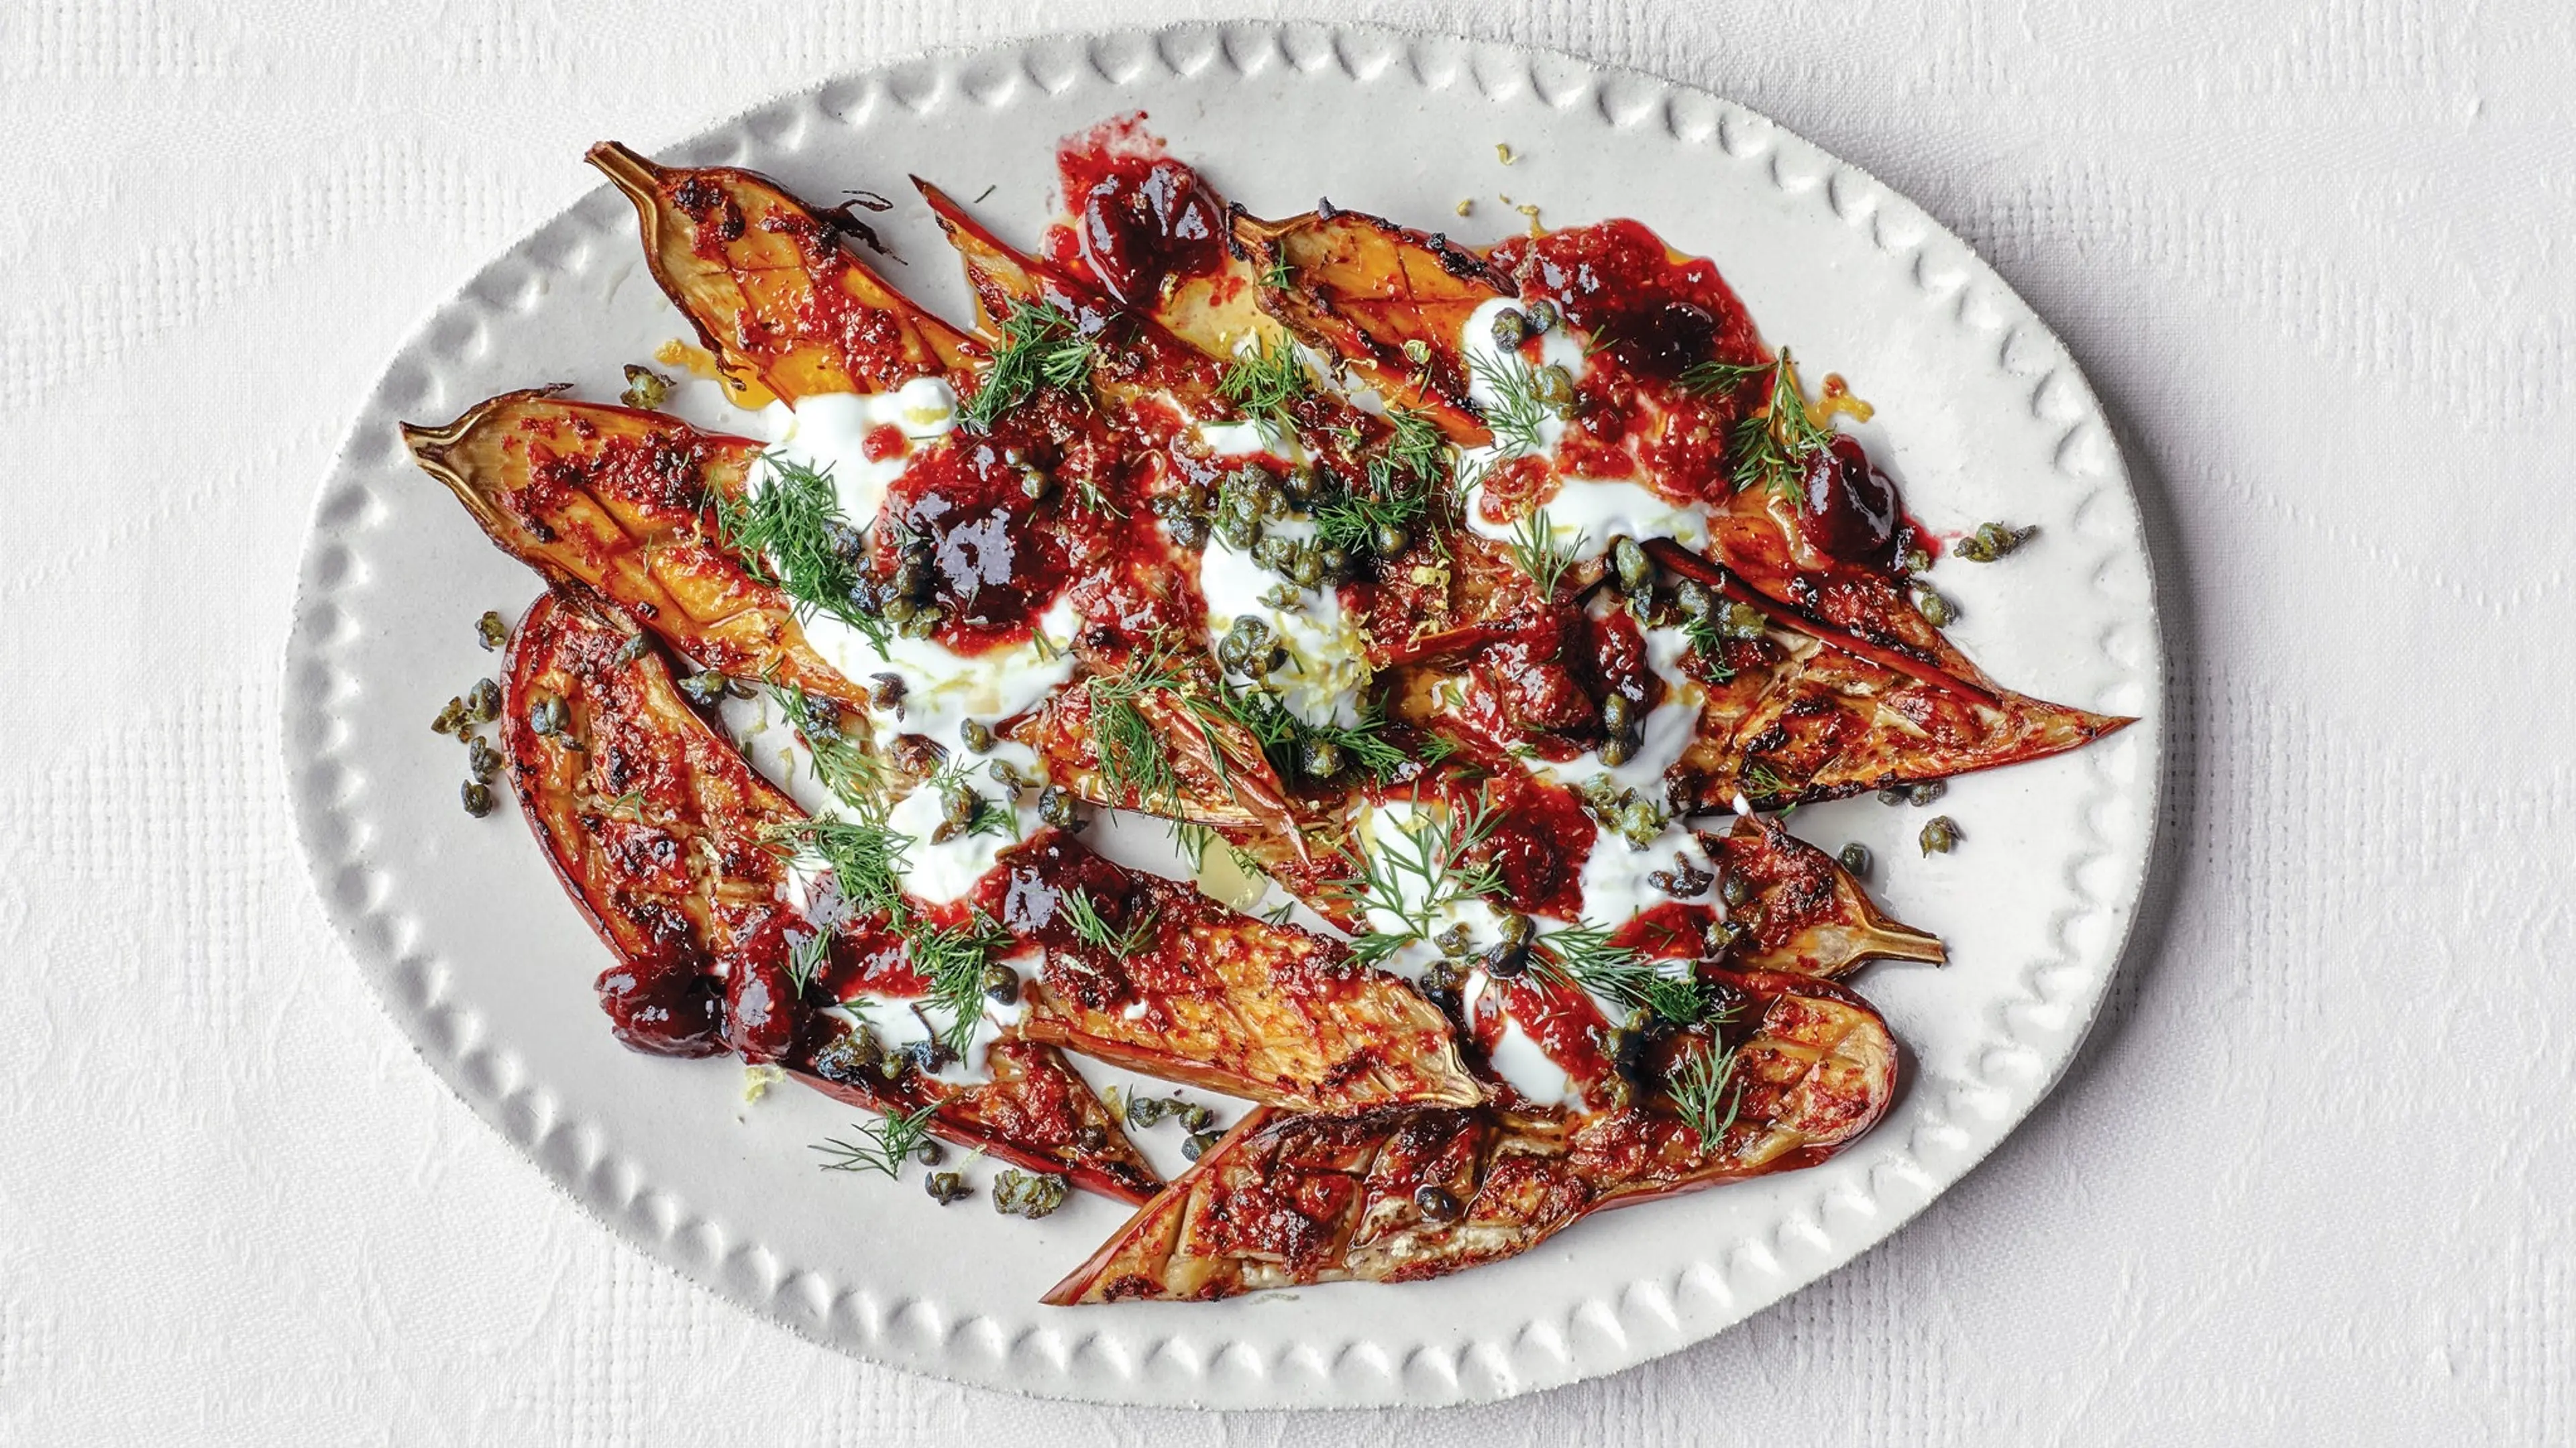 Harissa-Roasted Eggplant With Fried Capers